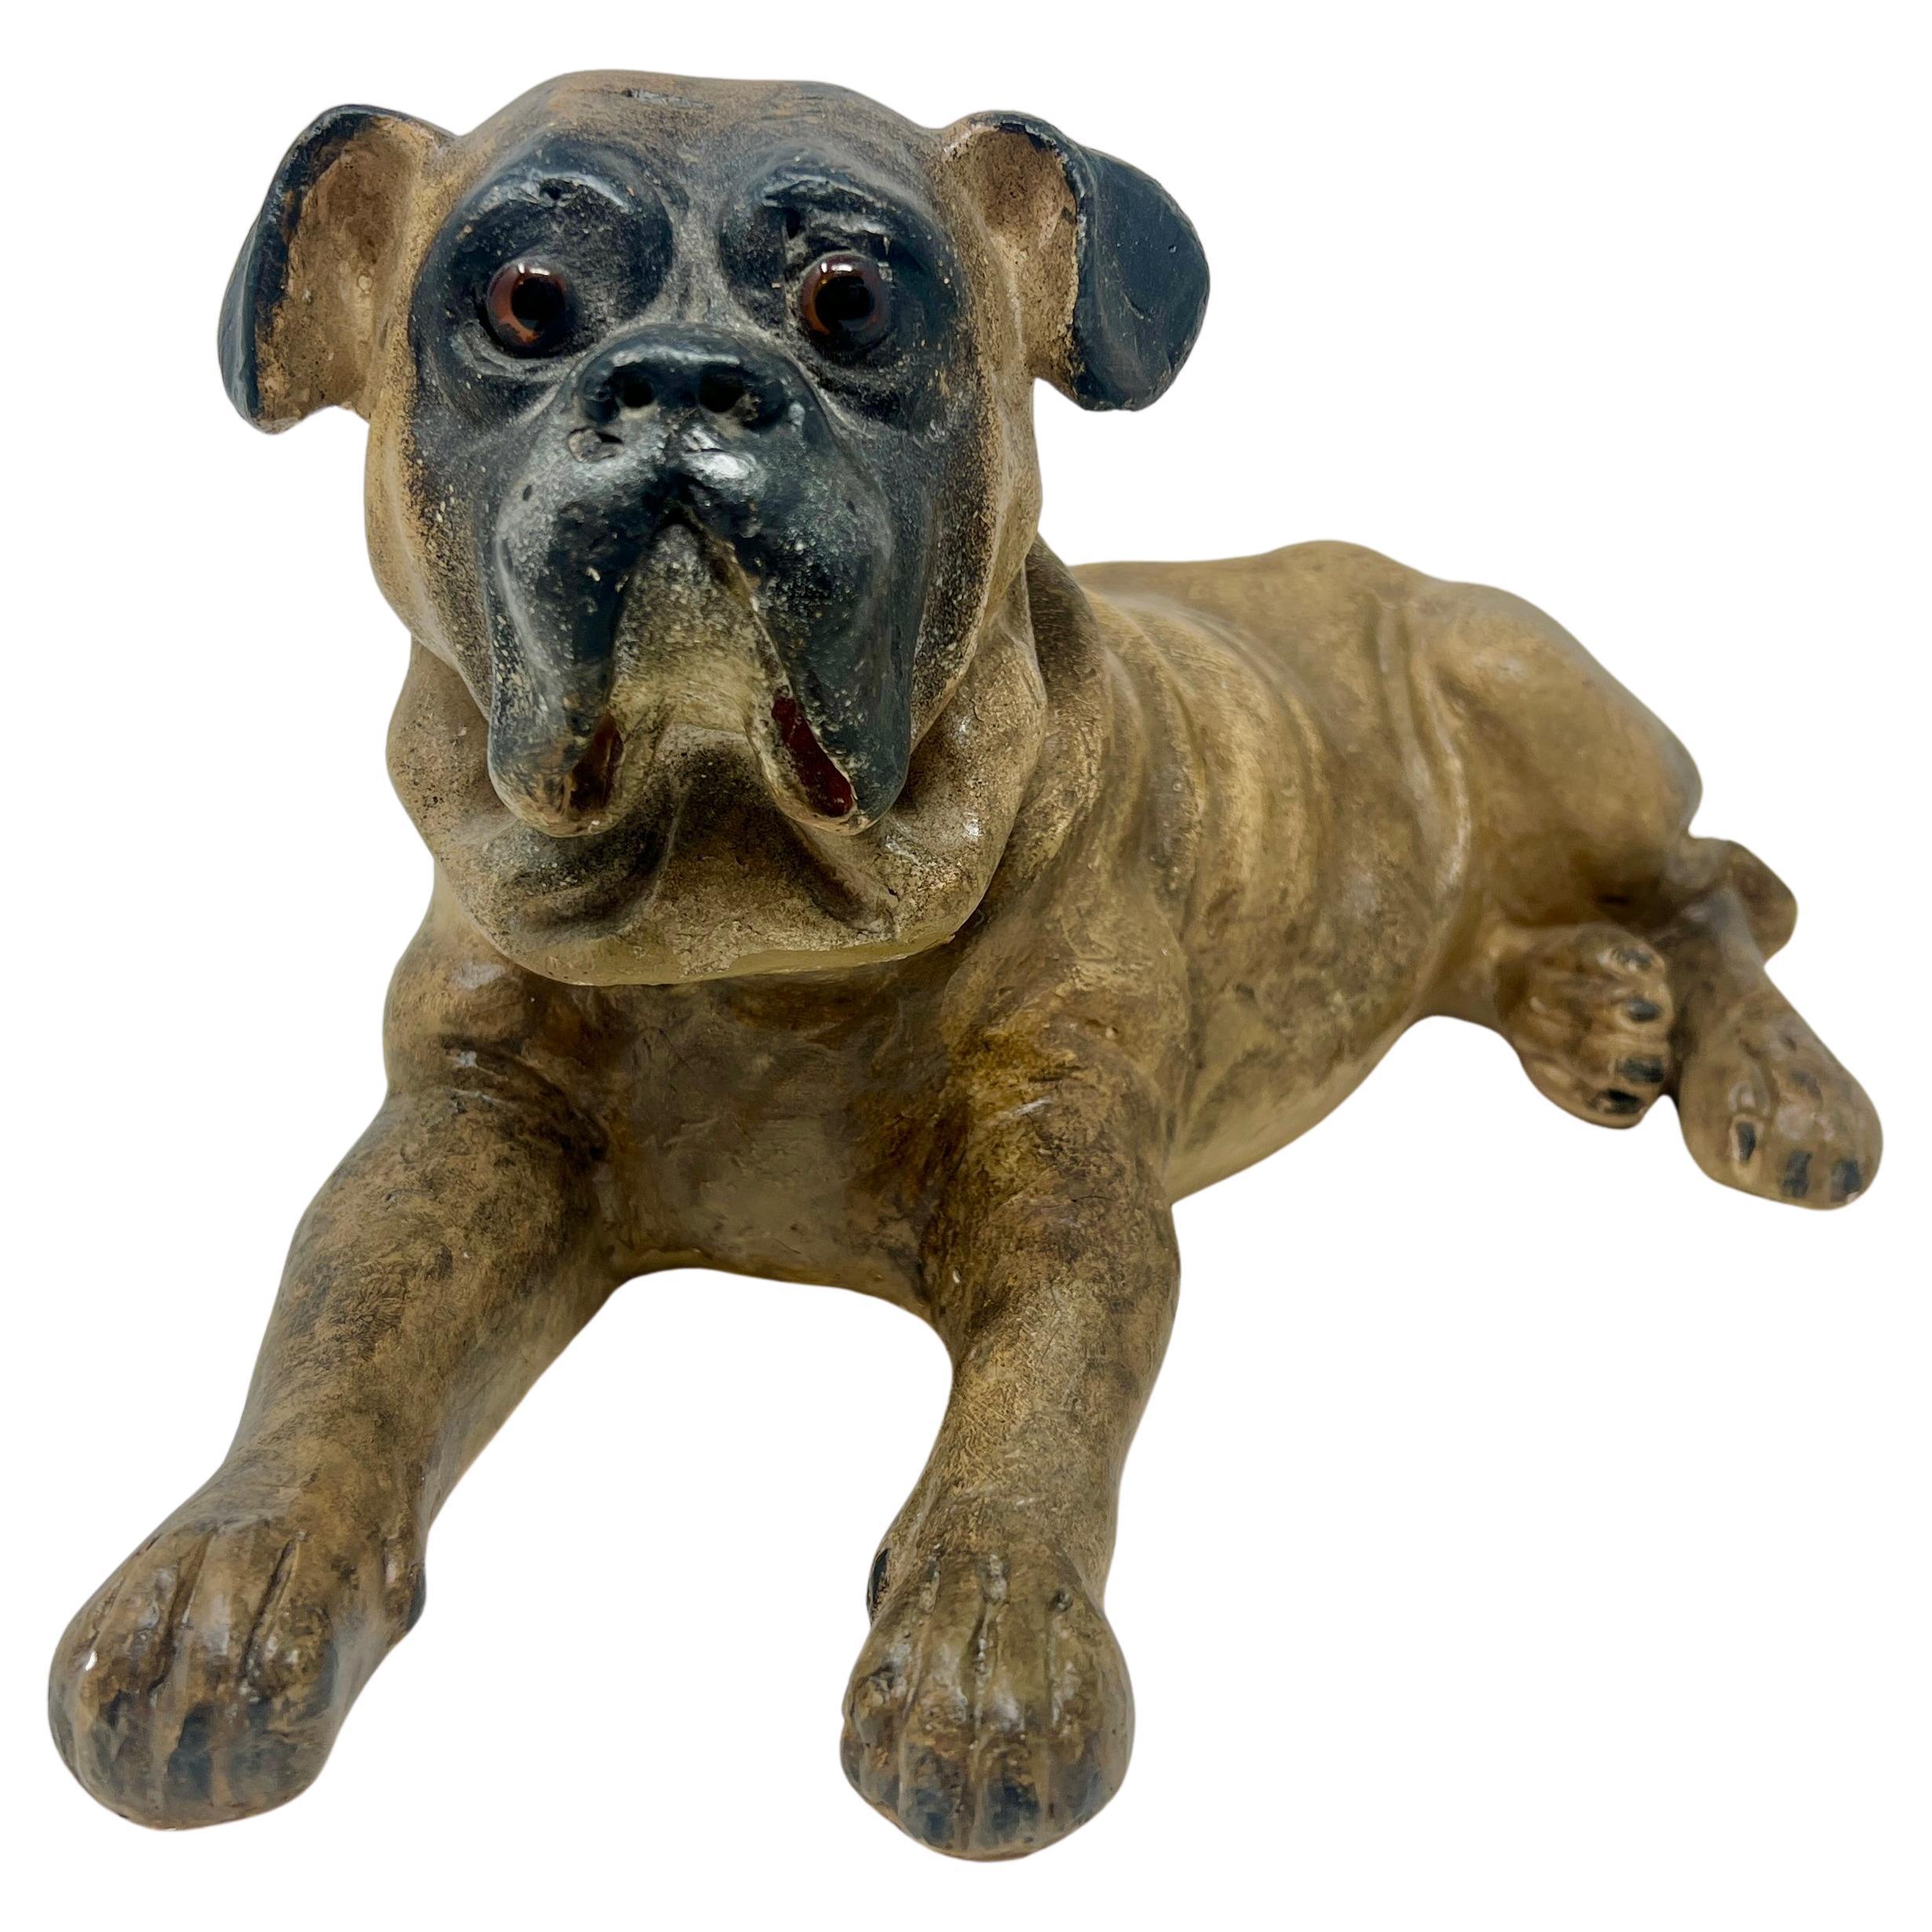 Antique Carved Plaster Dog with Glass Eyes, Circa 1910.